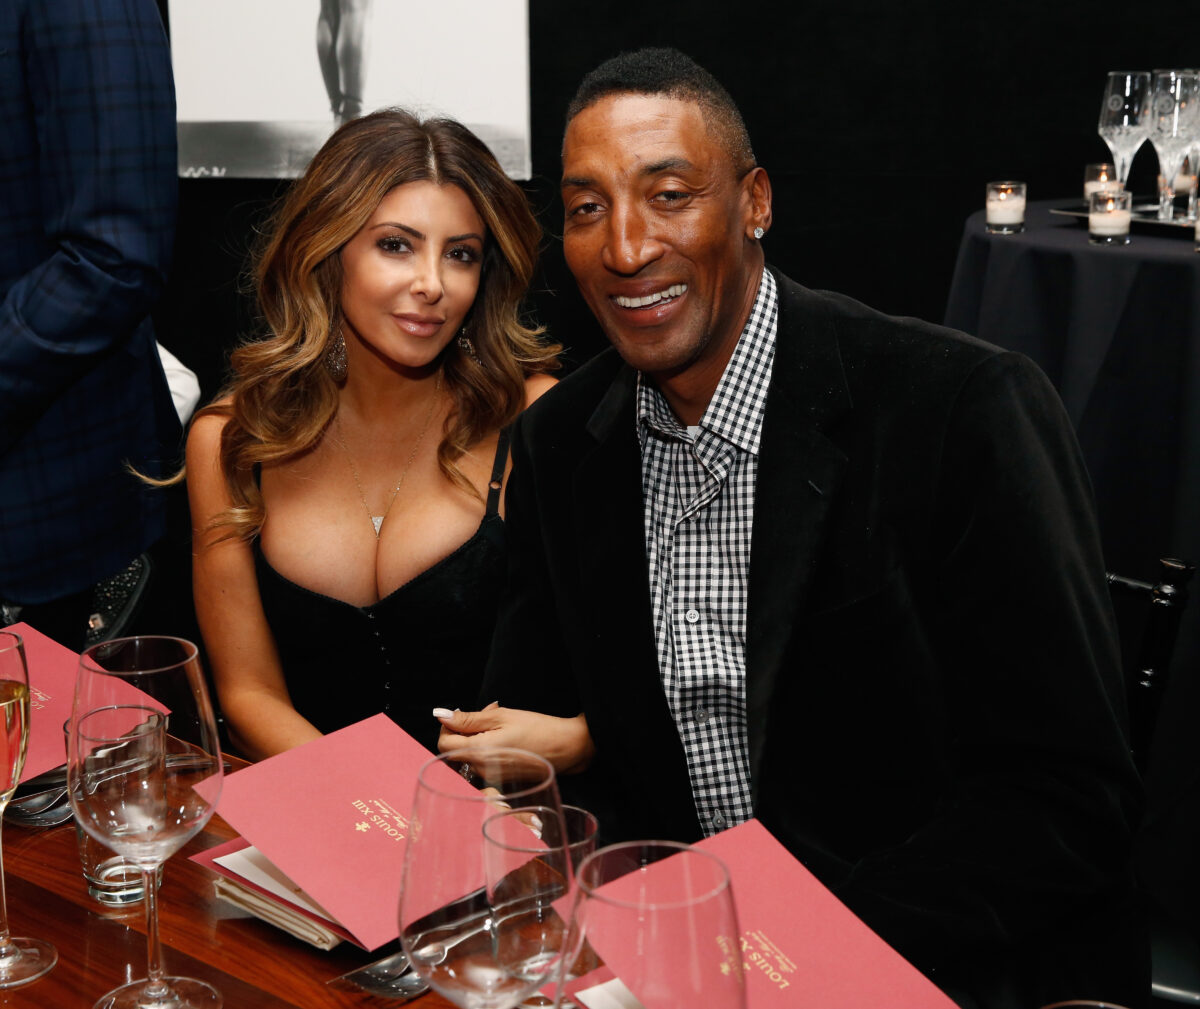 LOOK: Larsa Pippen through the years